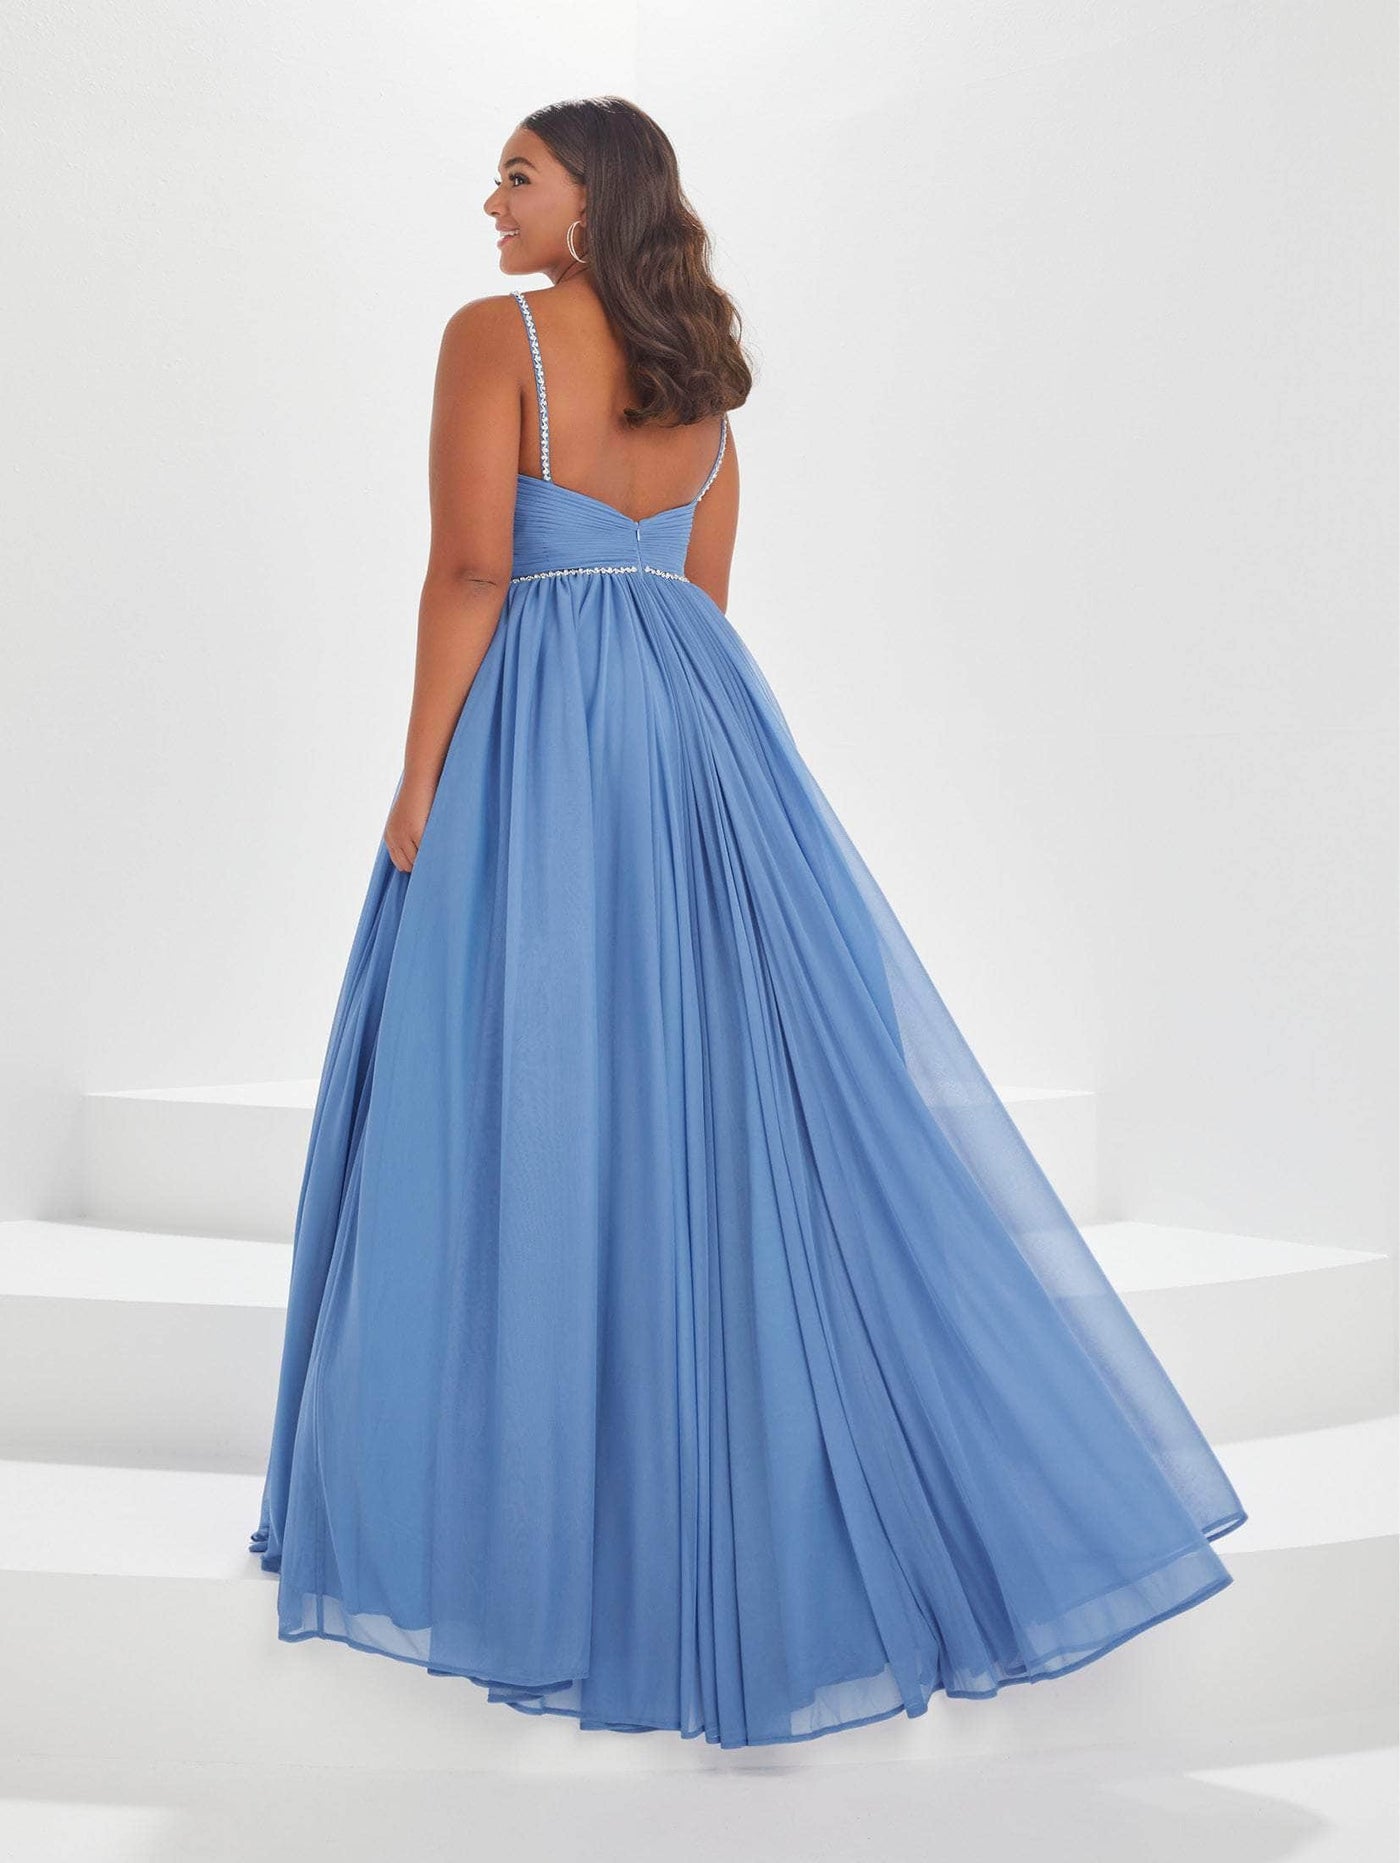 Tiffany Designs by Christina Wu 16036 - Pleated Chiffon Prom Gown Special Occasion Dress